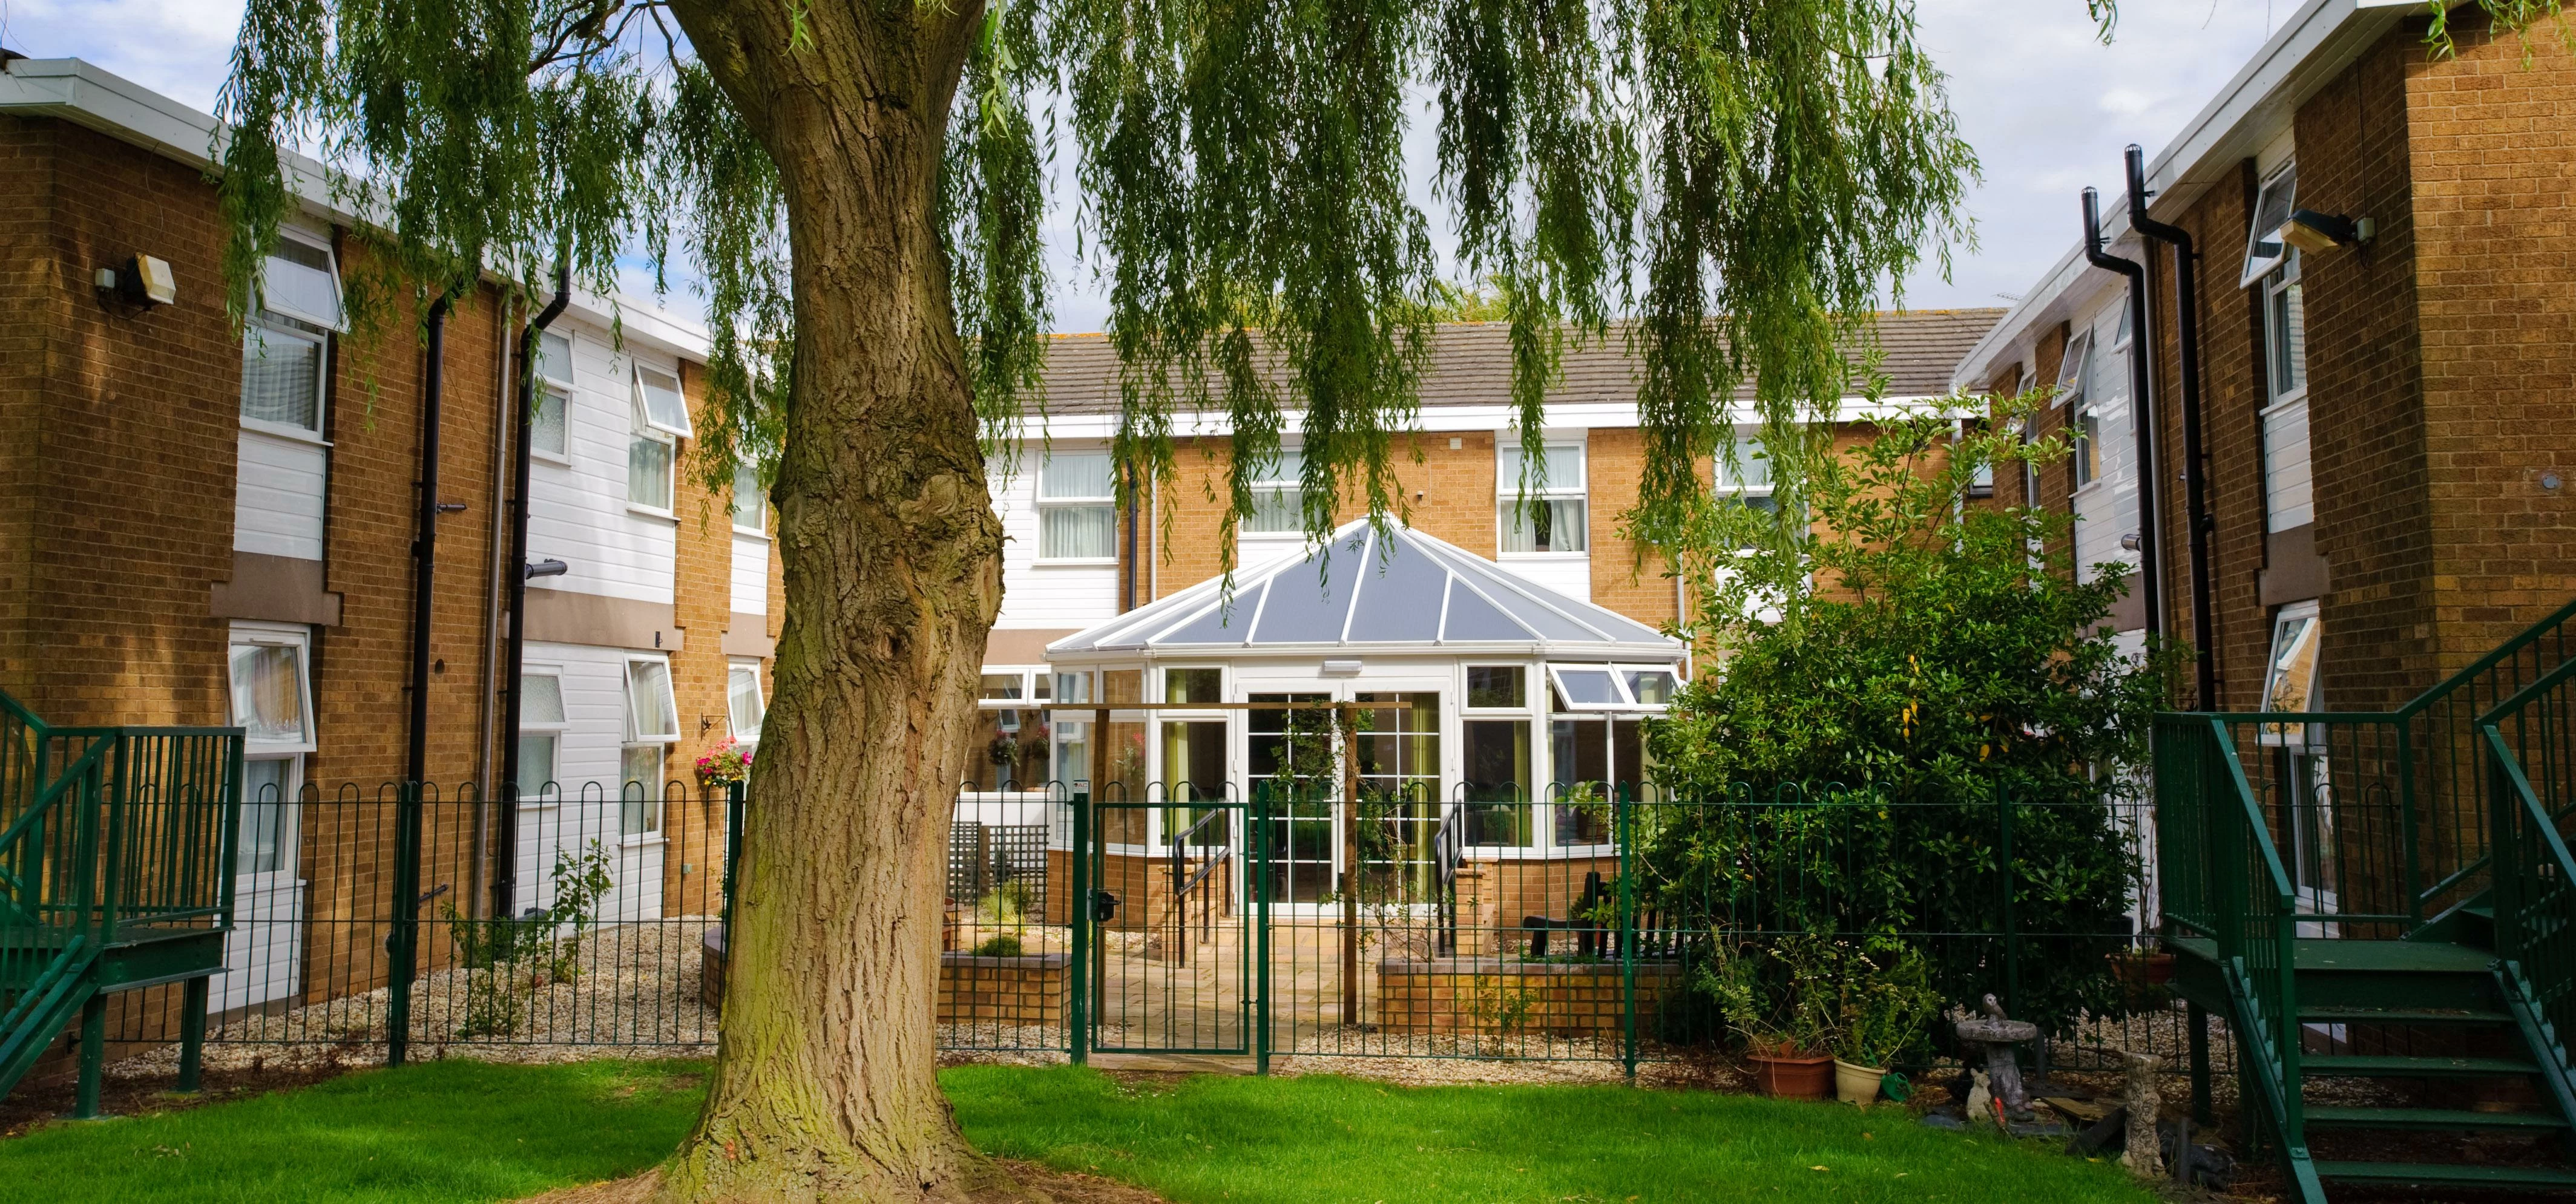 Alderlea care home is hosting a wellbeing day for the local community 